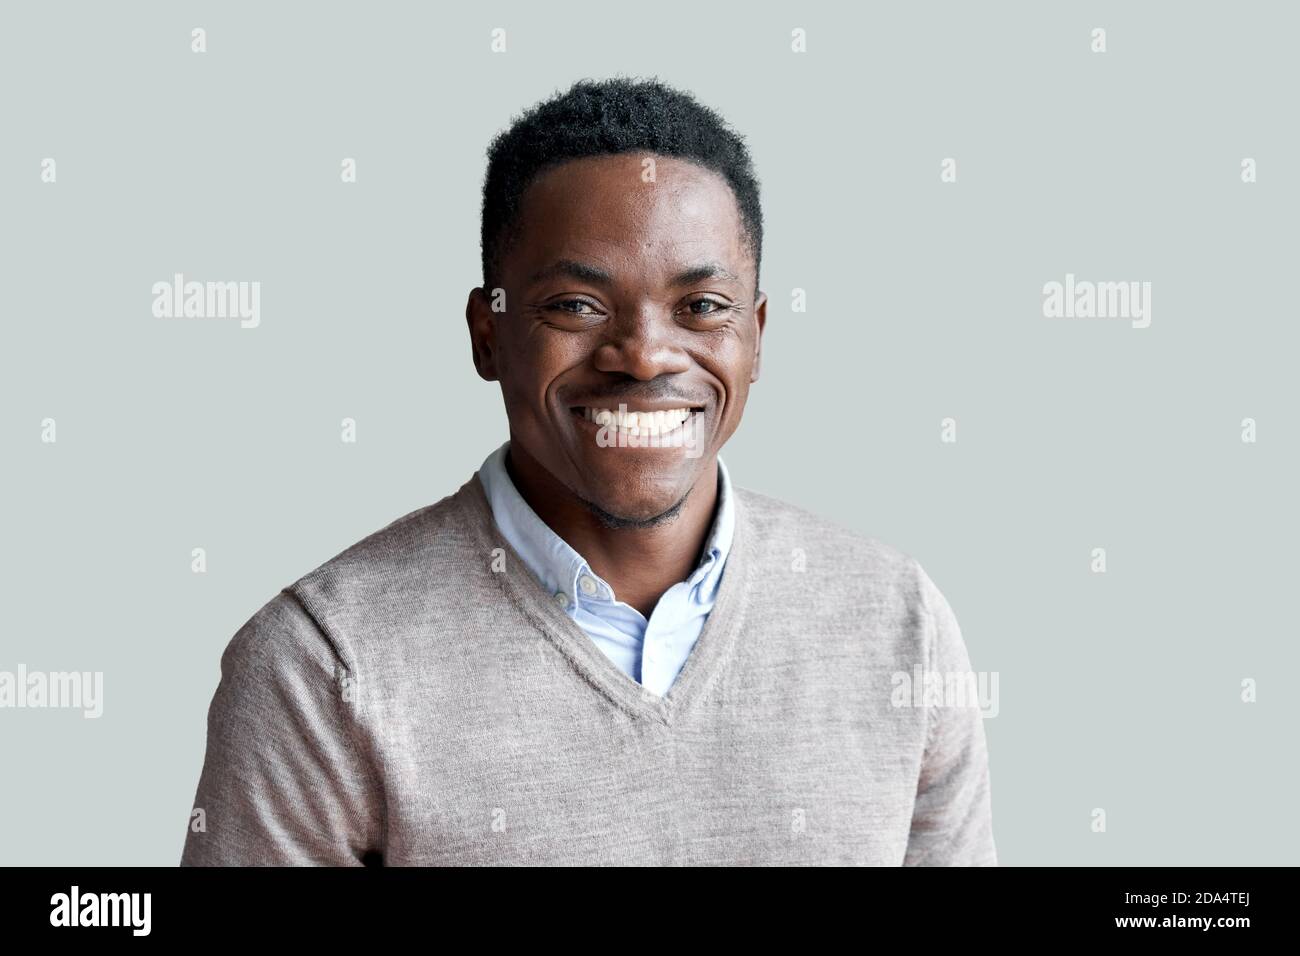 Smiling young african man looking at camera standing at home, headshot portrait. Stock Photo